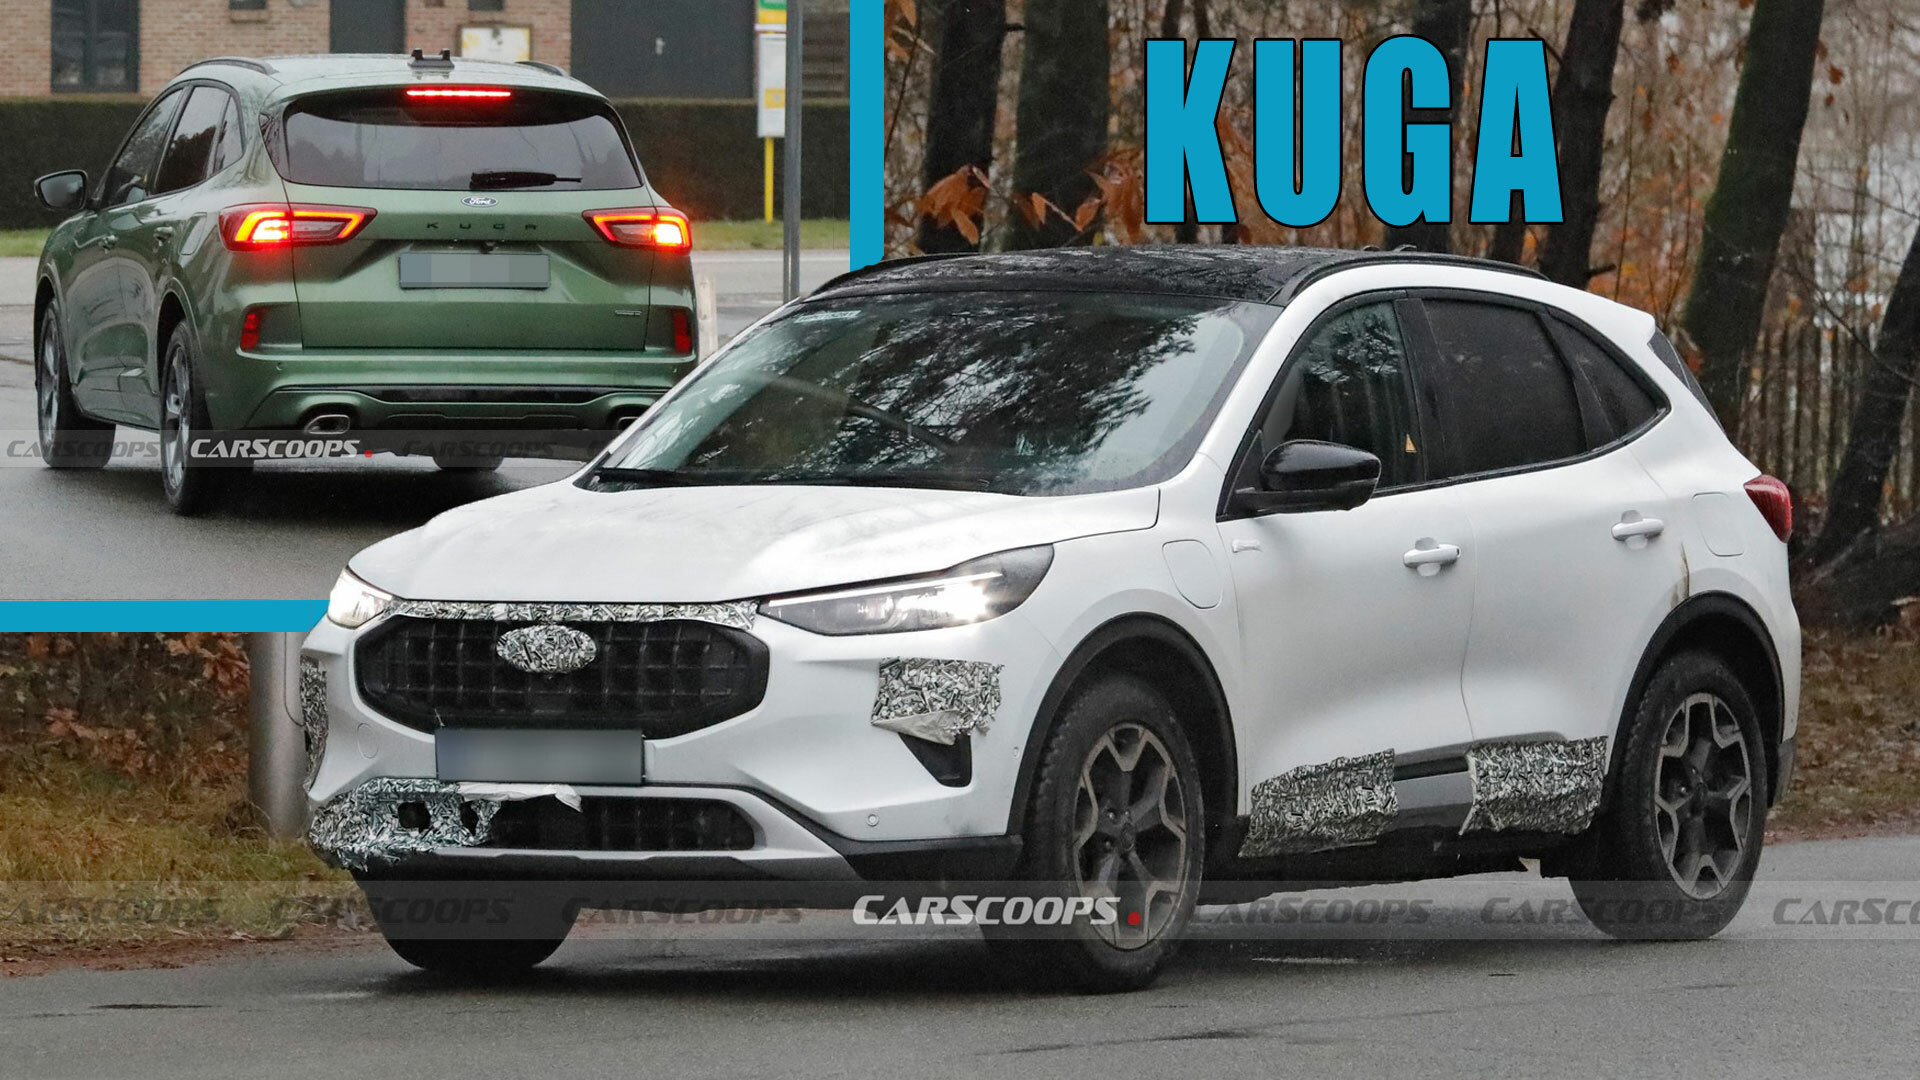 Ford Escape / Kuga Facelift Shows Updated Face In Unofficial Rendering